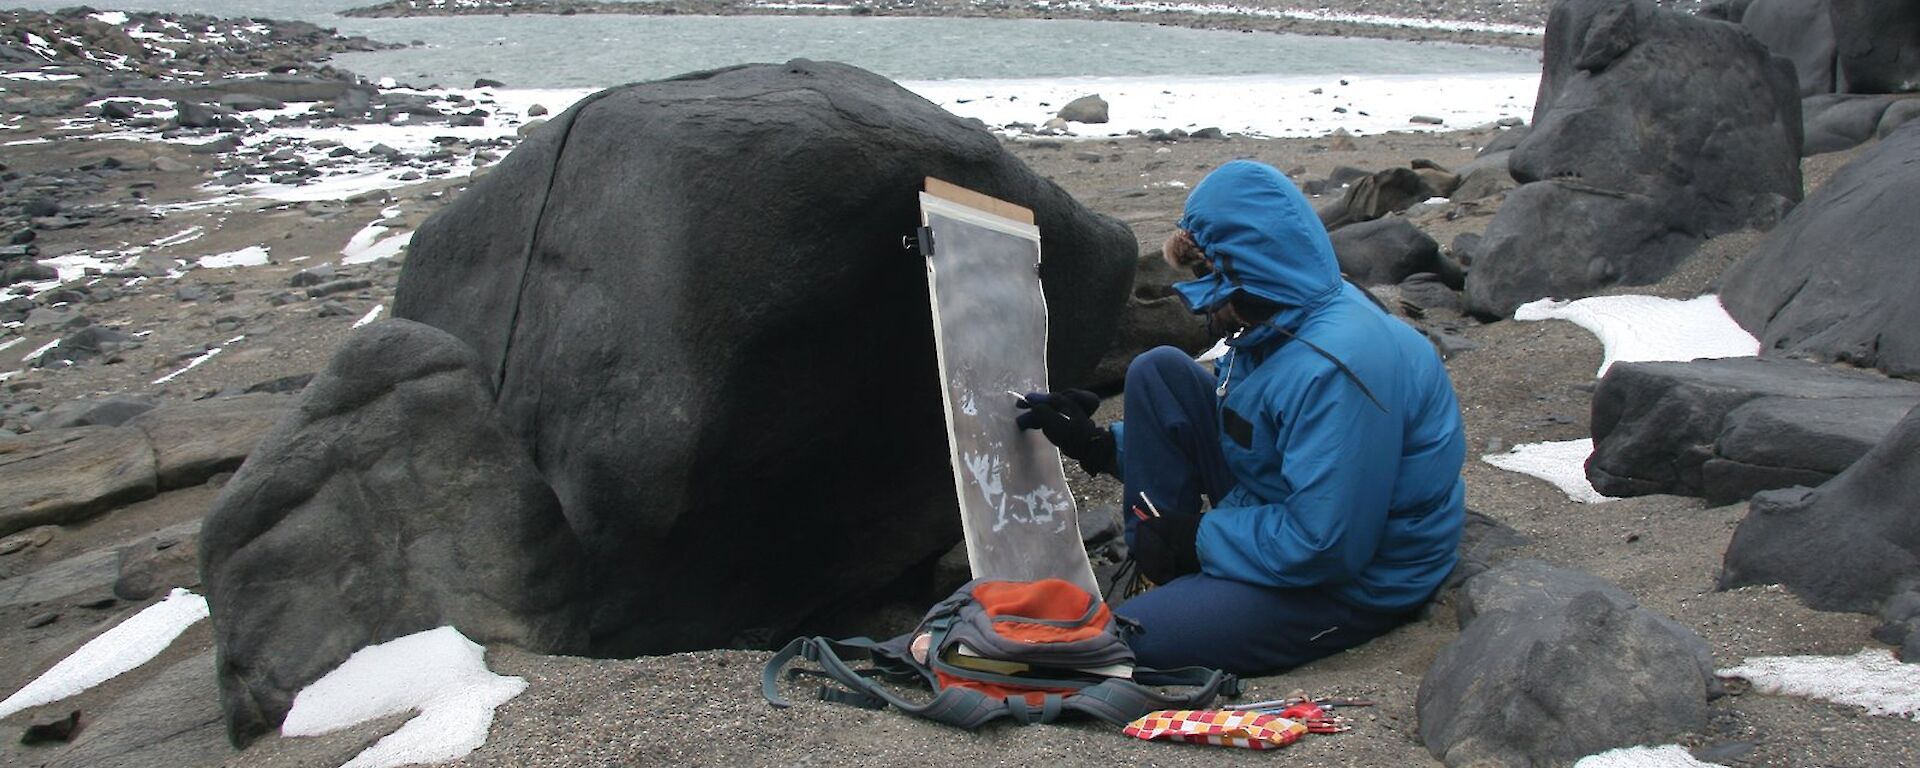 A person hunches on the ground painting with the canvas resting against a rock.